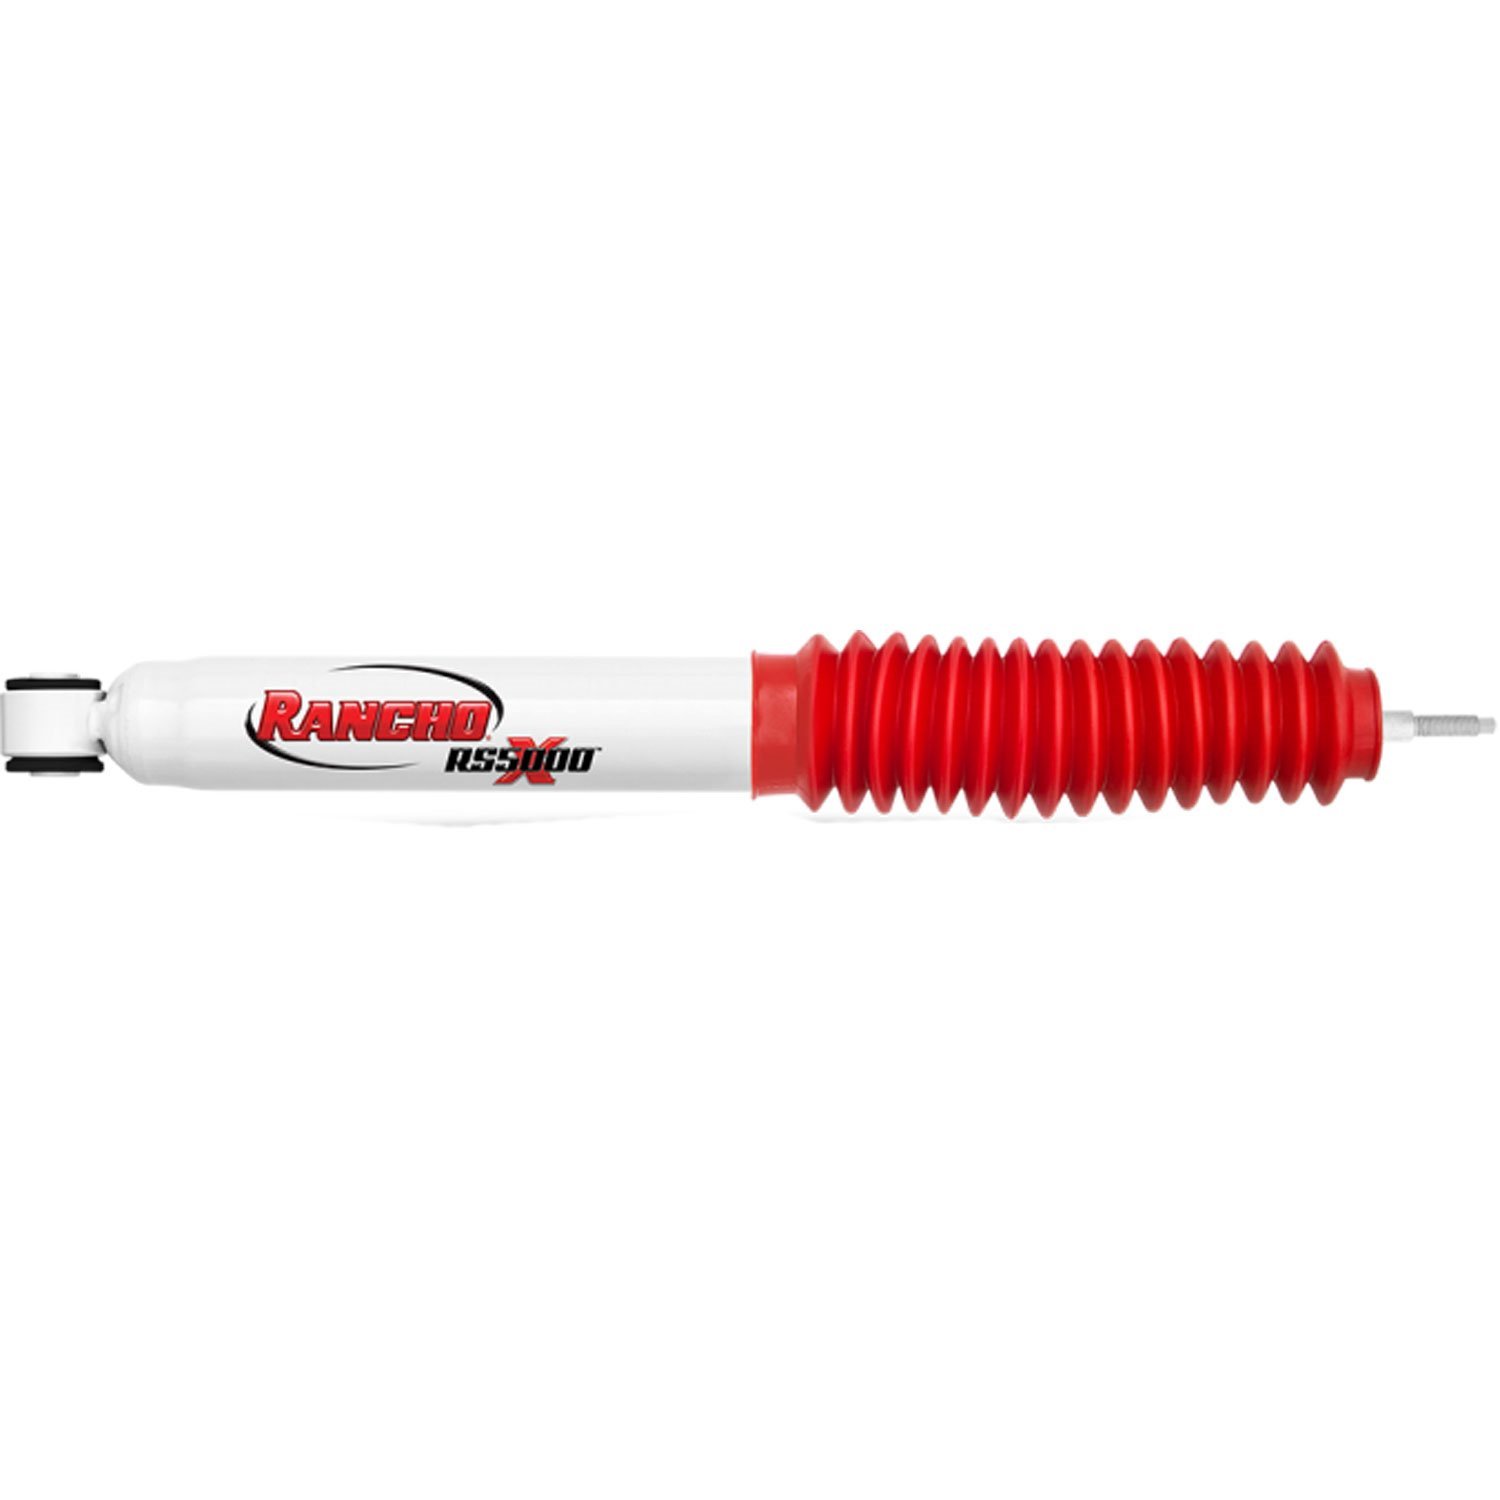 RS5000X Front Shock Absorber Fits GM Fullsize Pickups and SUVs